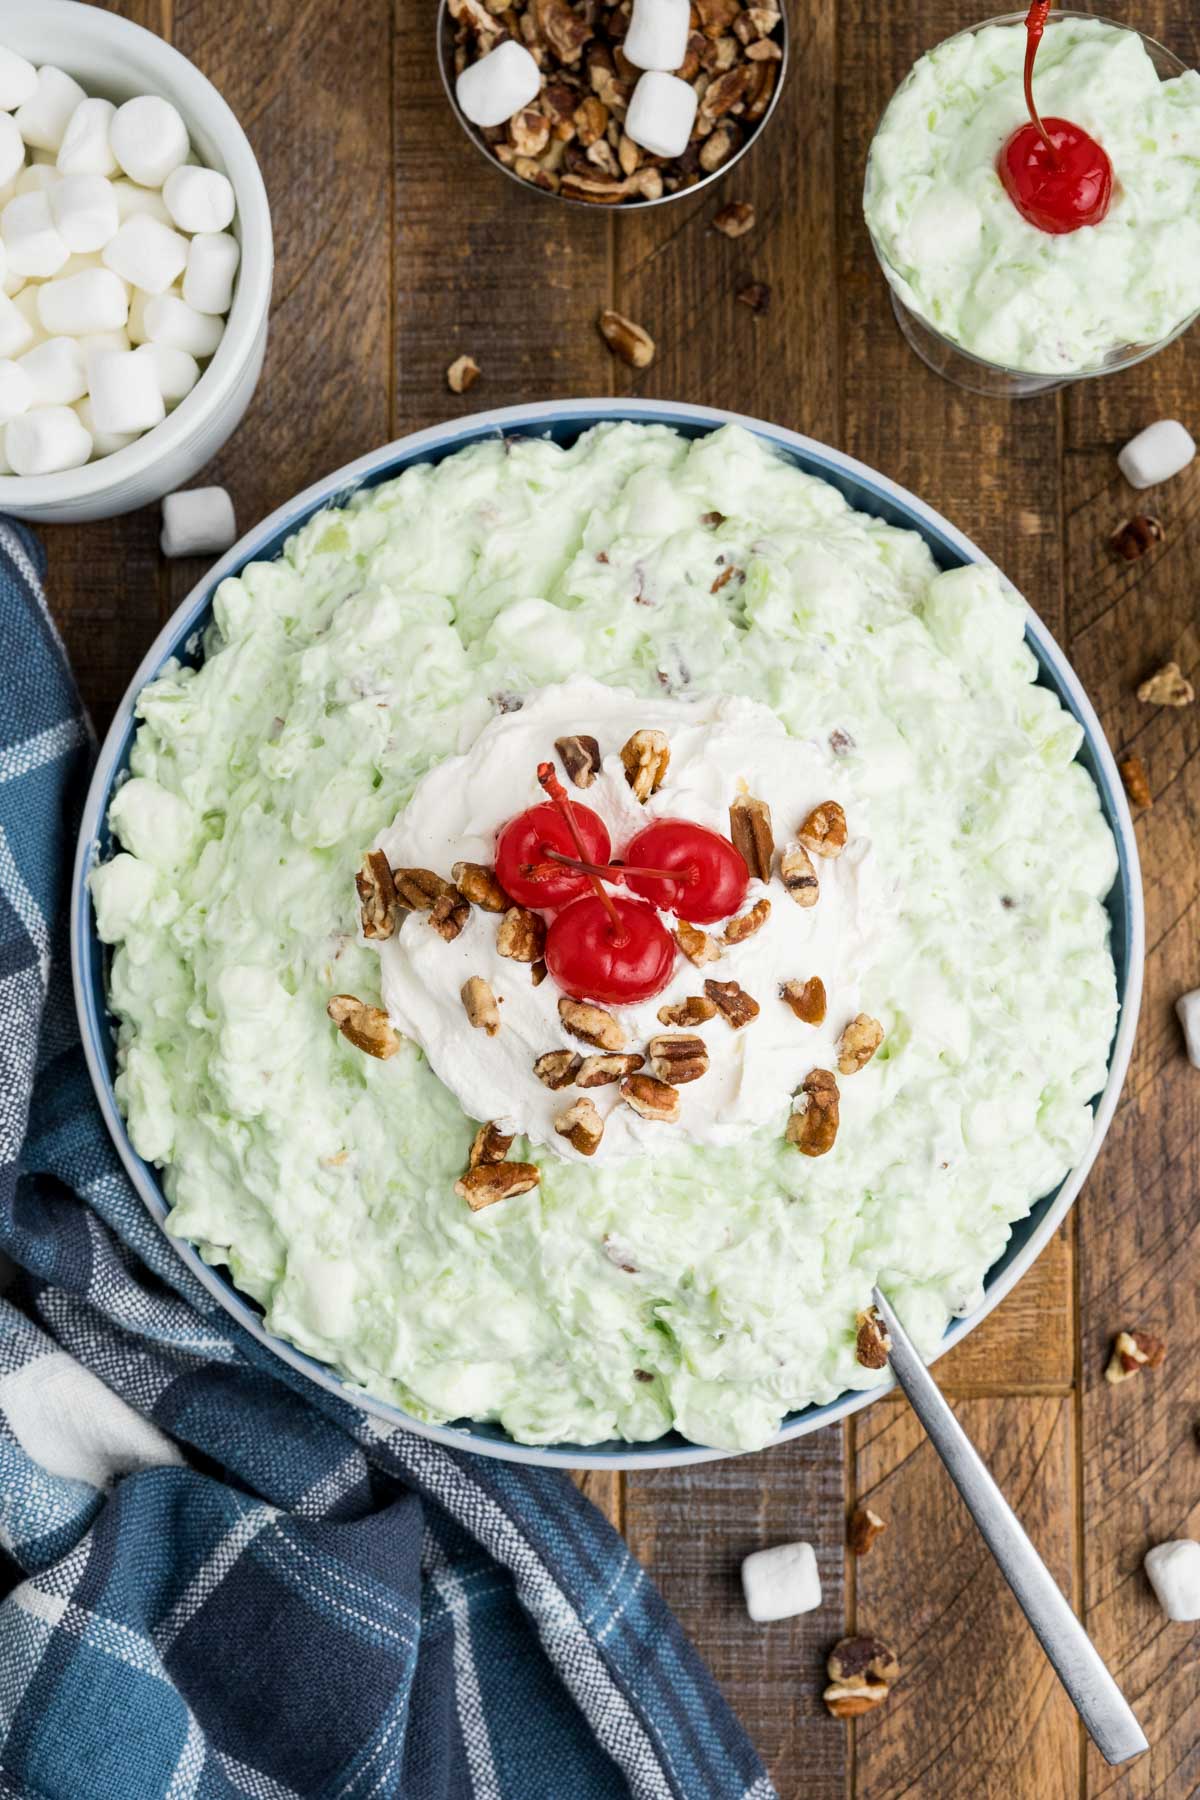 Pistachio fluff salad in a serving bowl with a spoon.